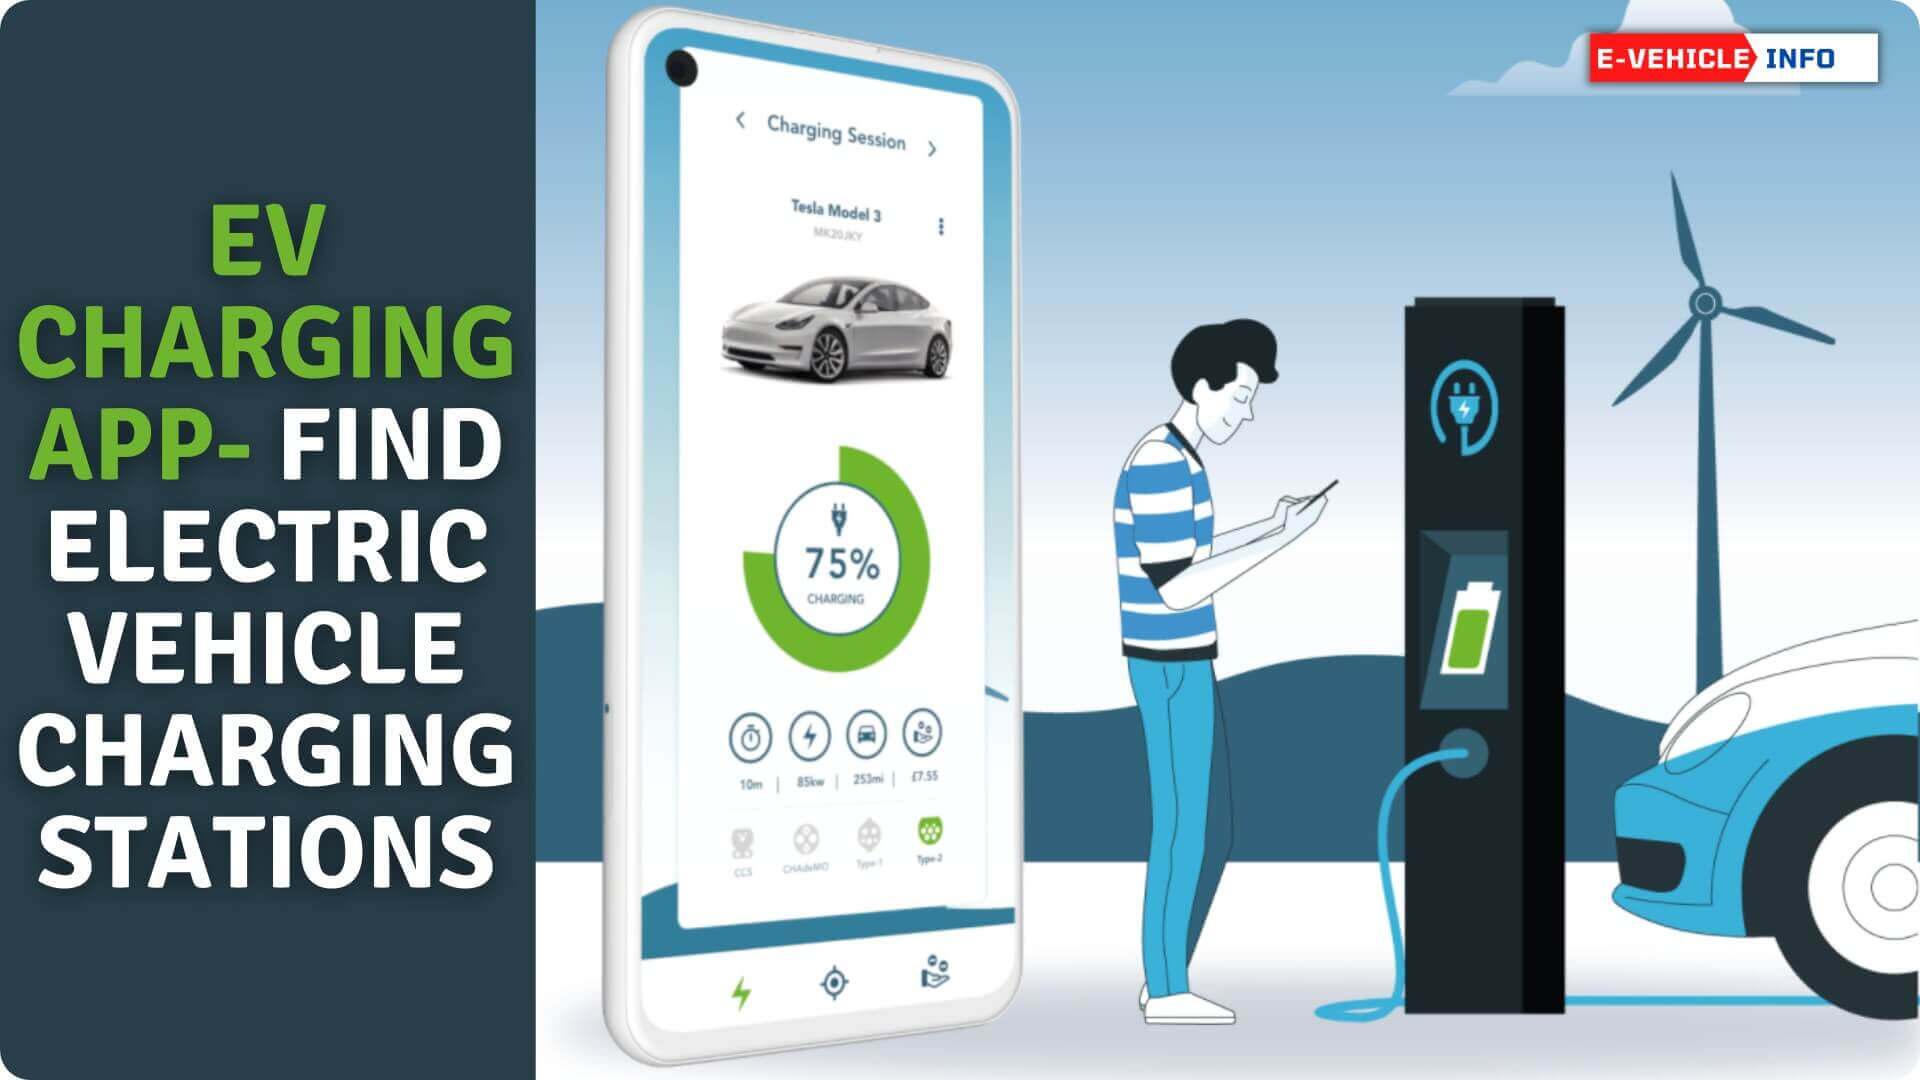 https://e-vehicleinfo.com/ev-charging-app-find-electric-vehicle-charging-stations/